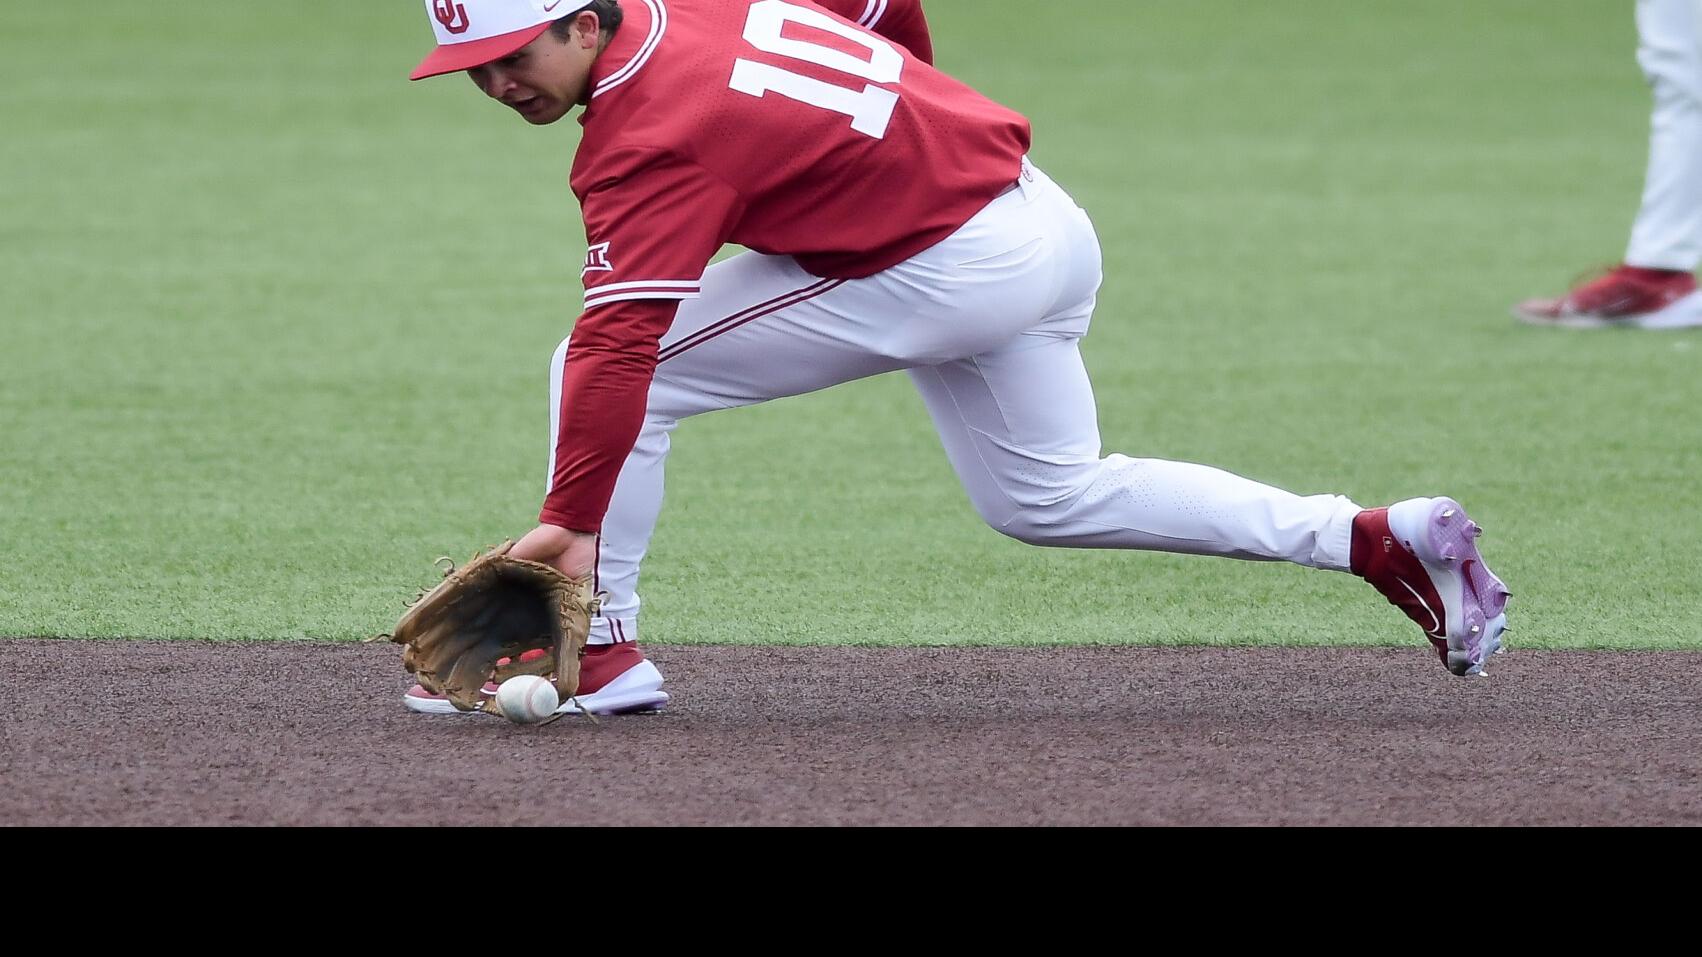 Harris Selected in 11th Round of MLB Draft - University of Oklahoma